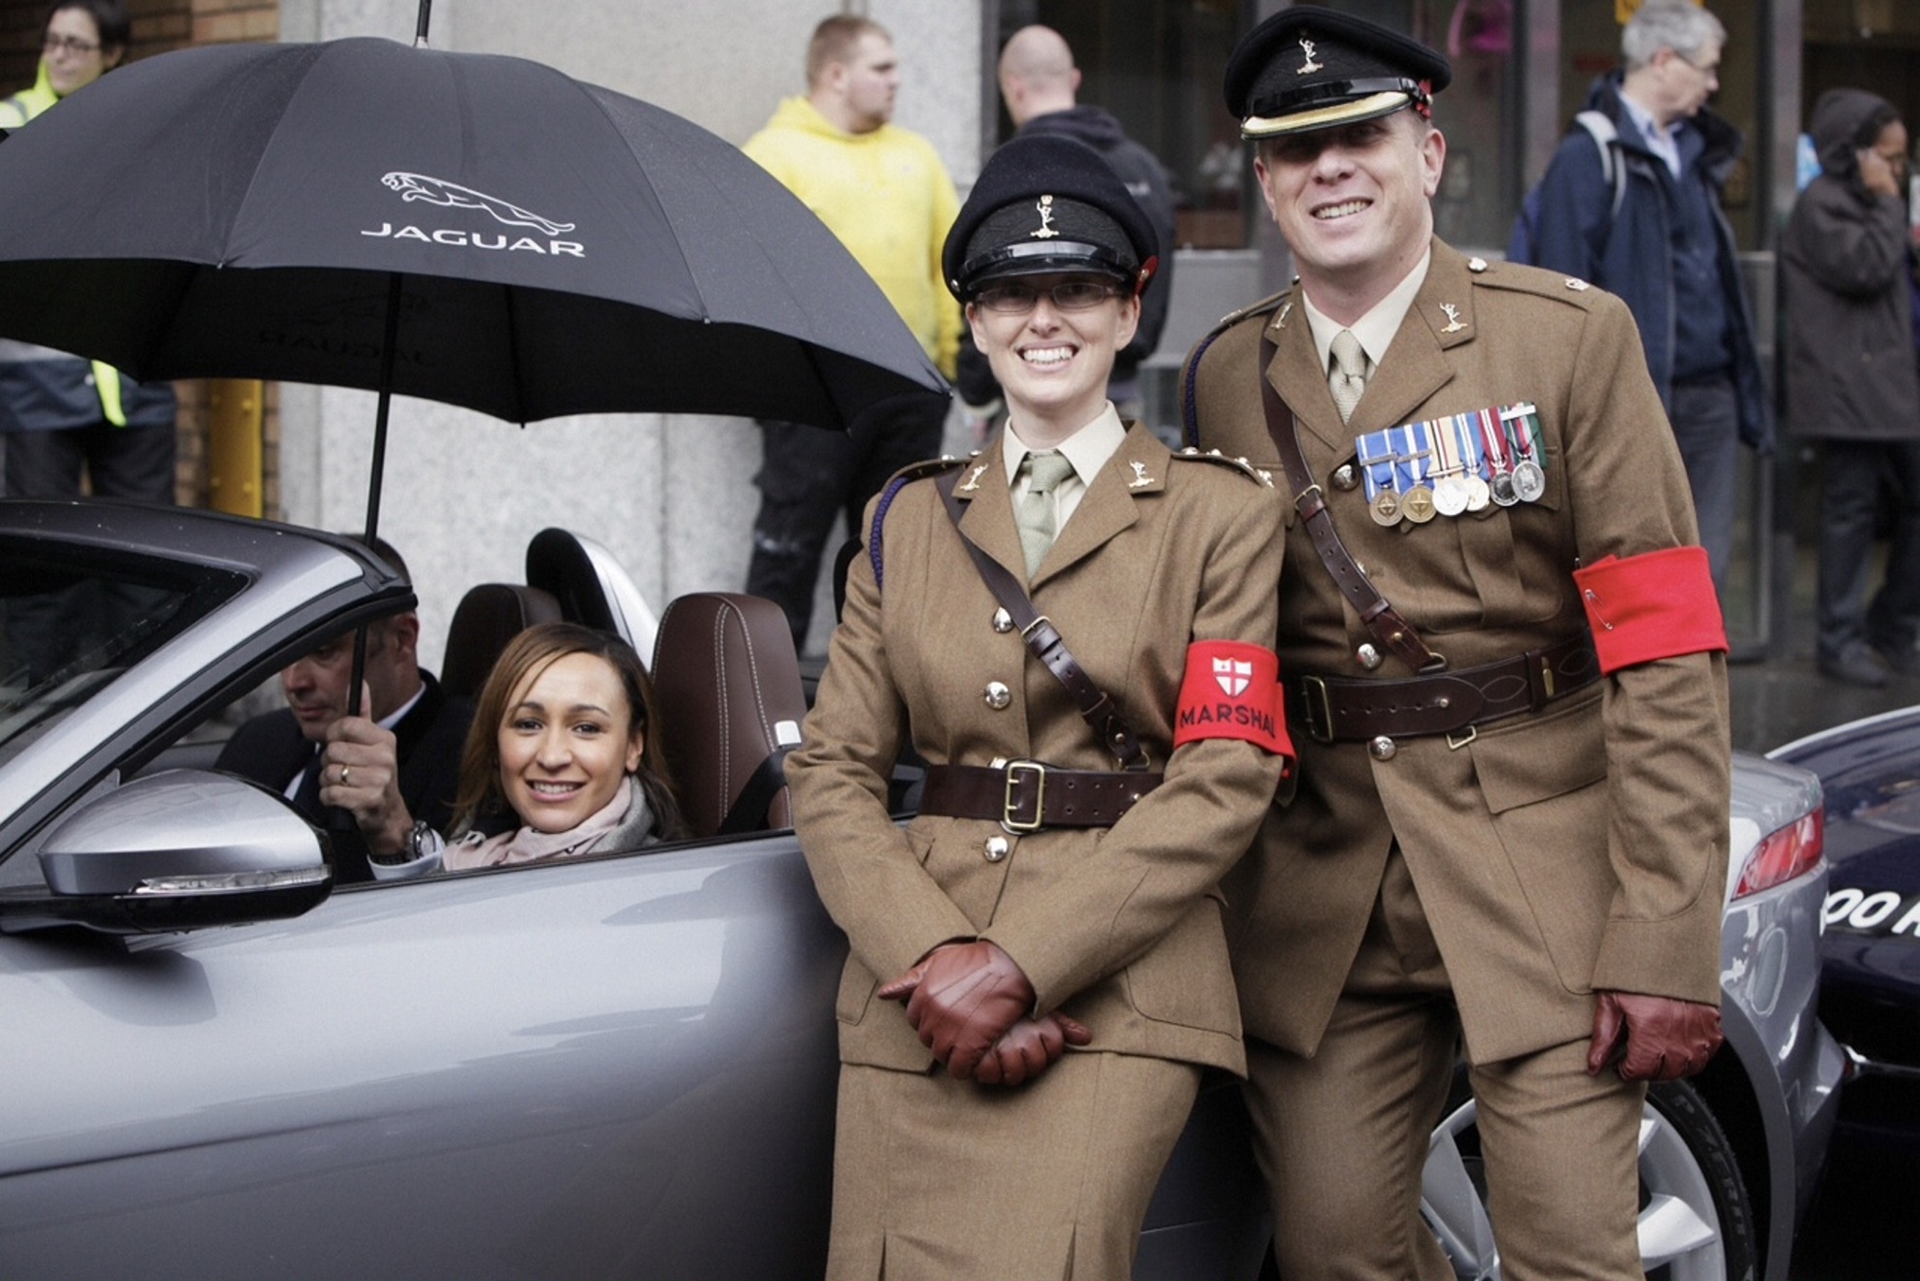 JAGUAR F-TYPE MAKES ITS UK DYNAMIC DEBUT WITH JESSICA ENNIS IN LONDON LORD MAYOR’S SHOW